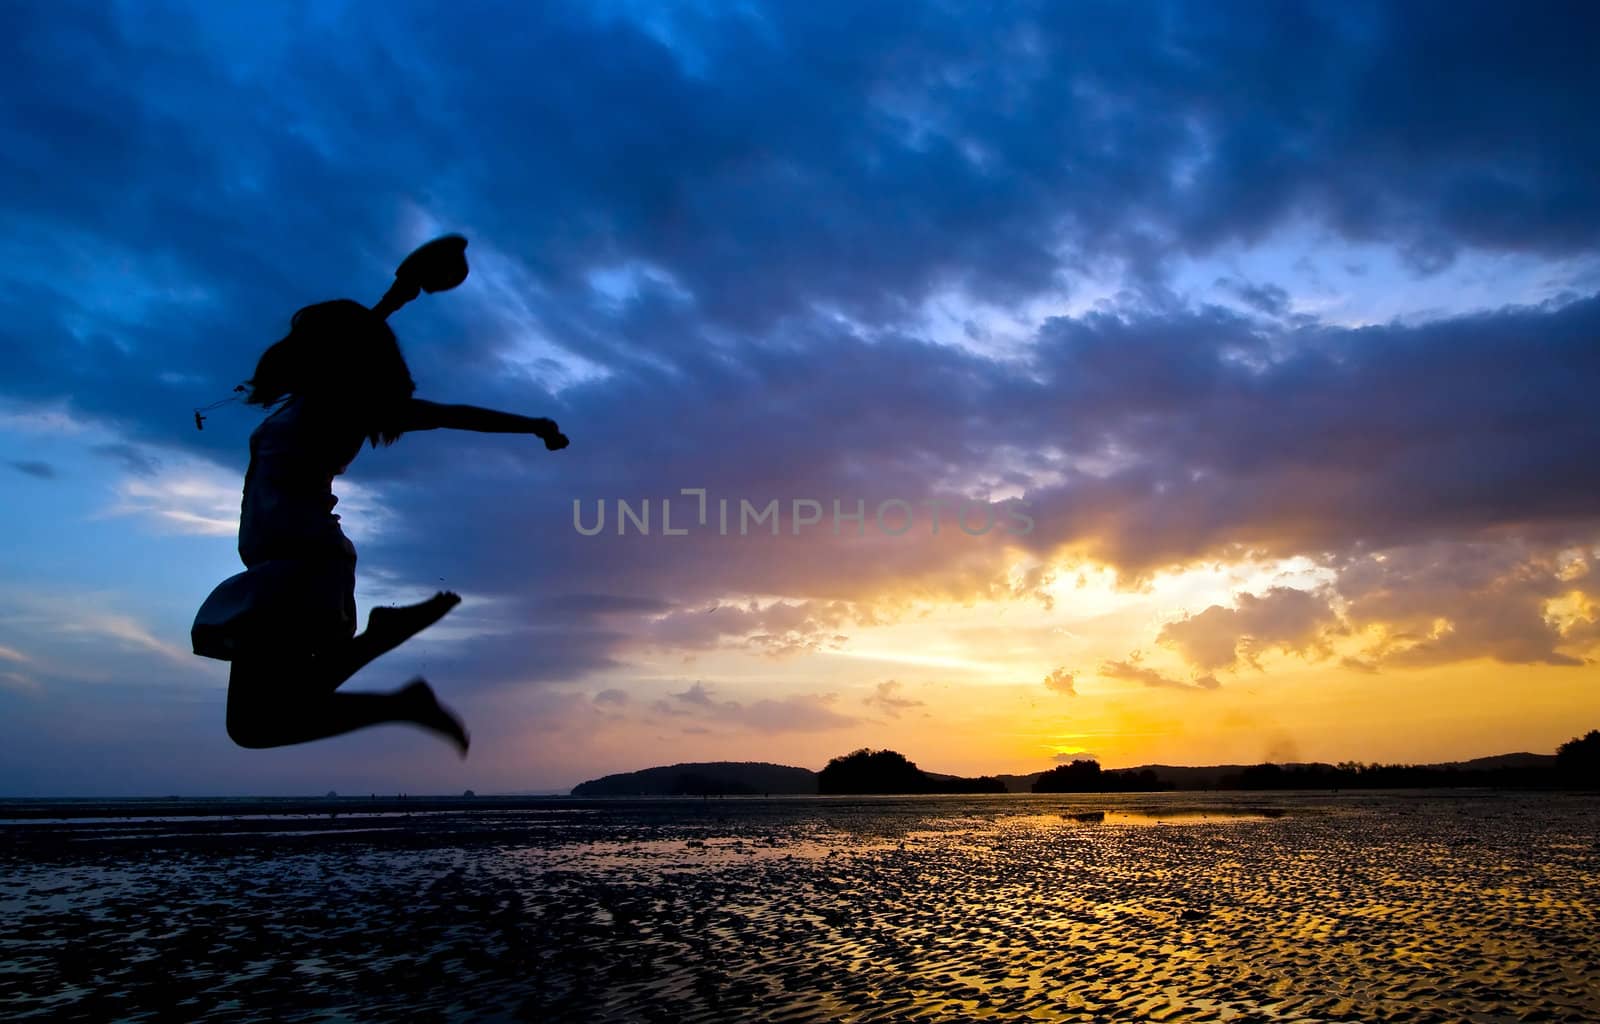 jumper at beach sunset by vichie81